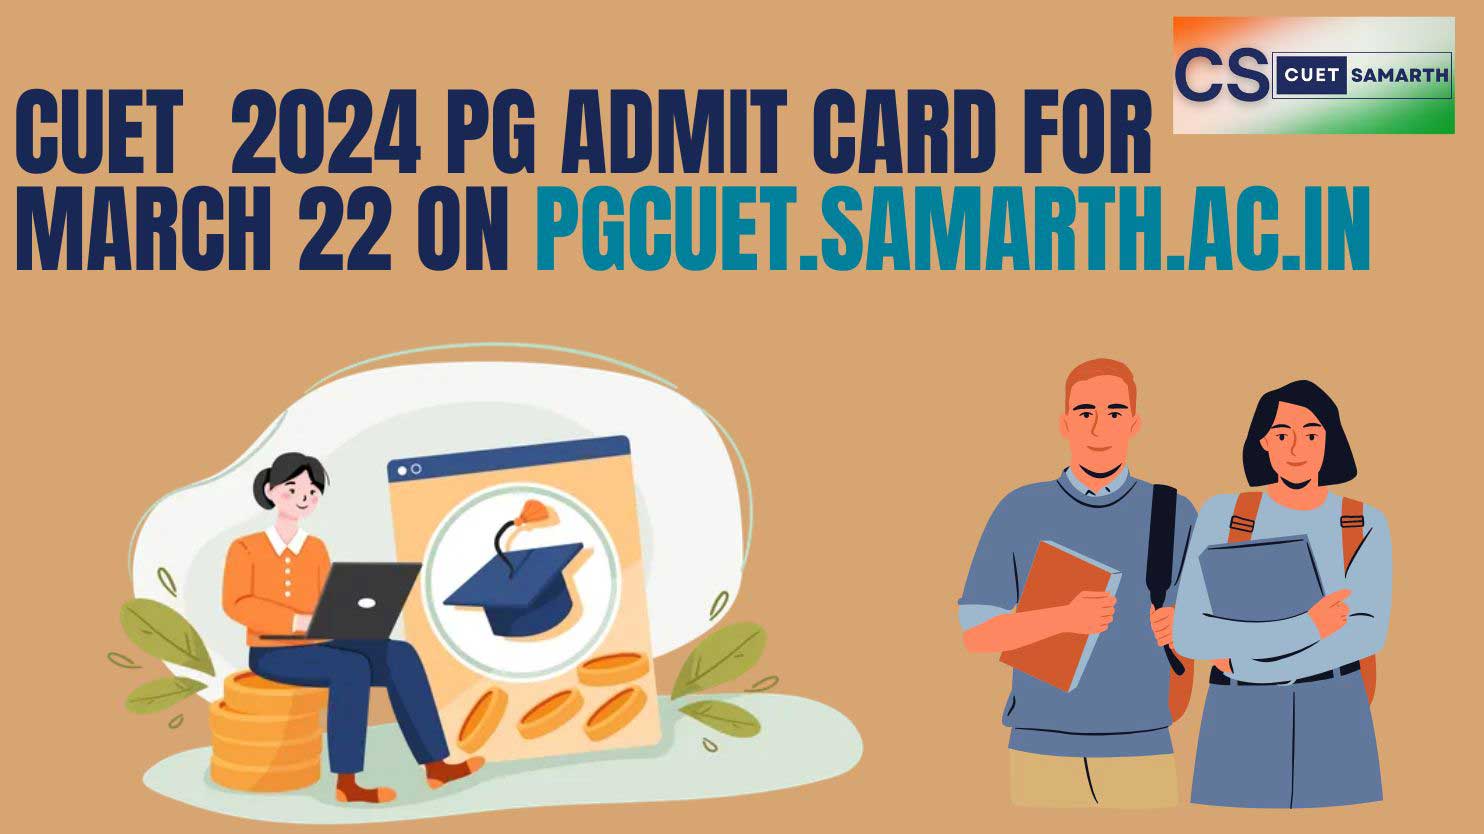 CUET  2024 PG Admit Card for March 22 on pgcuet.samarth.ac.in